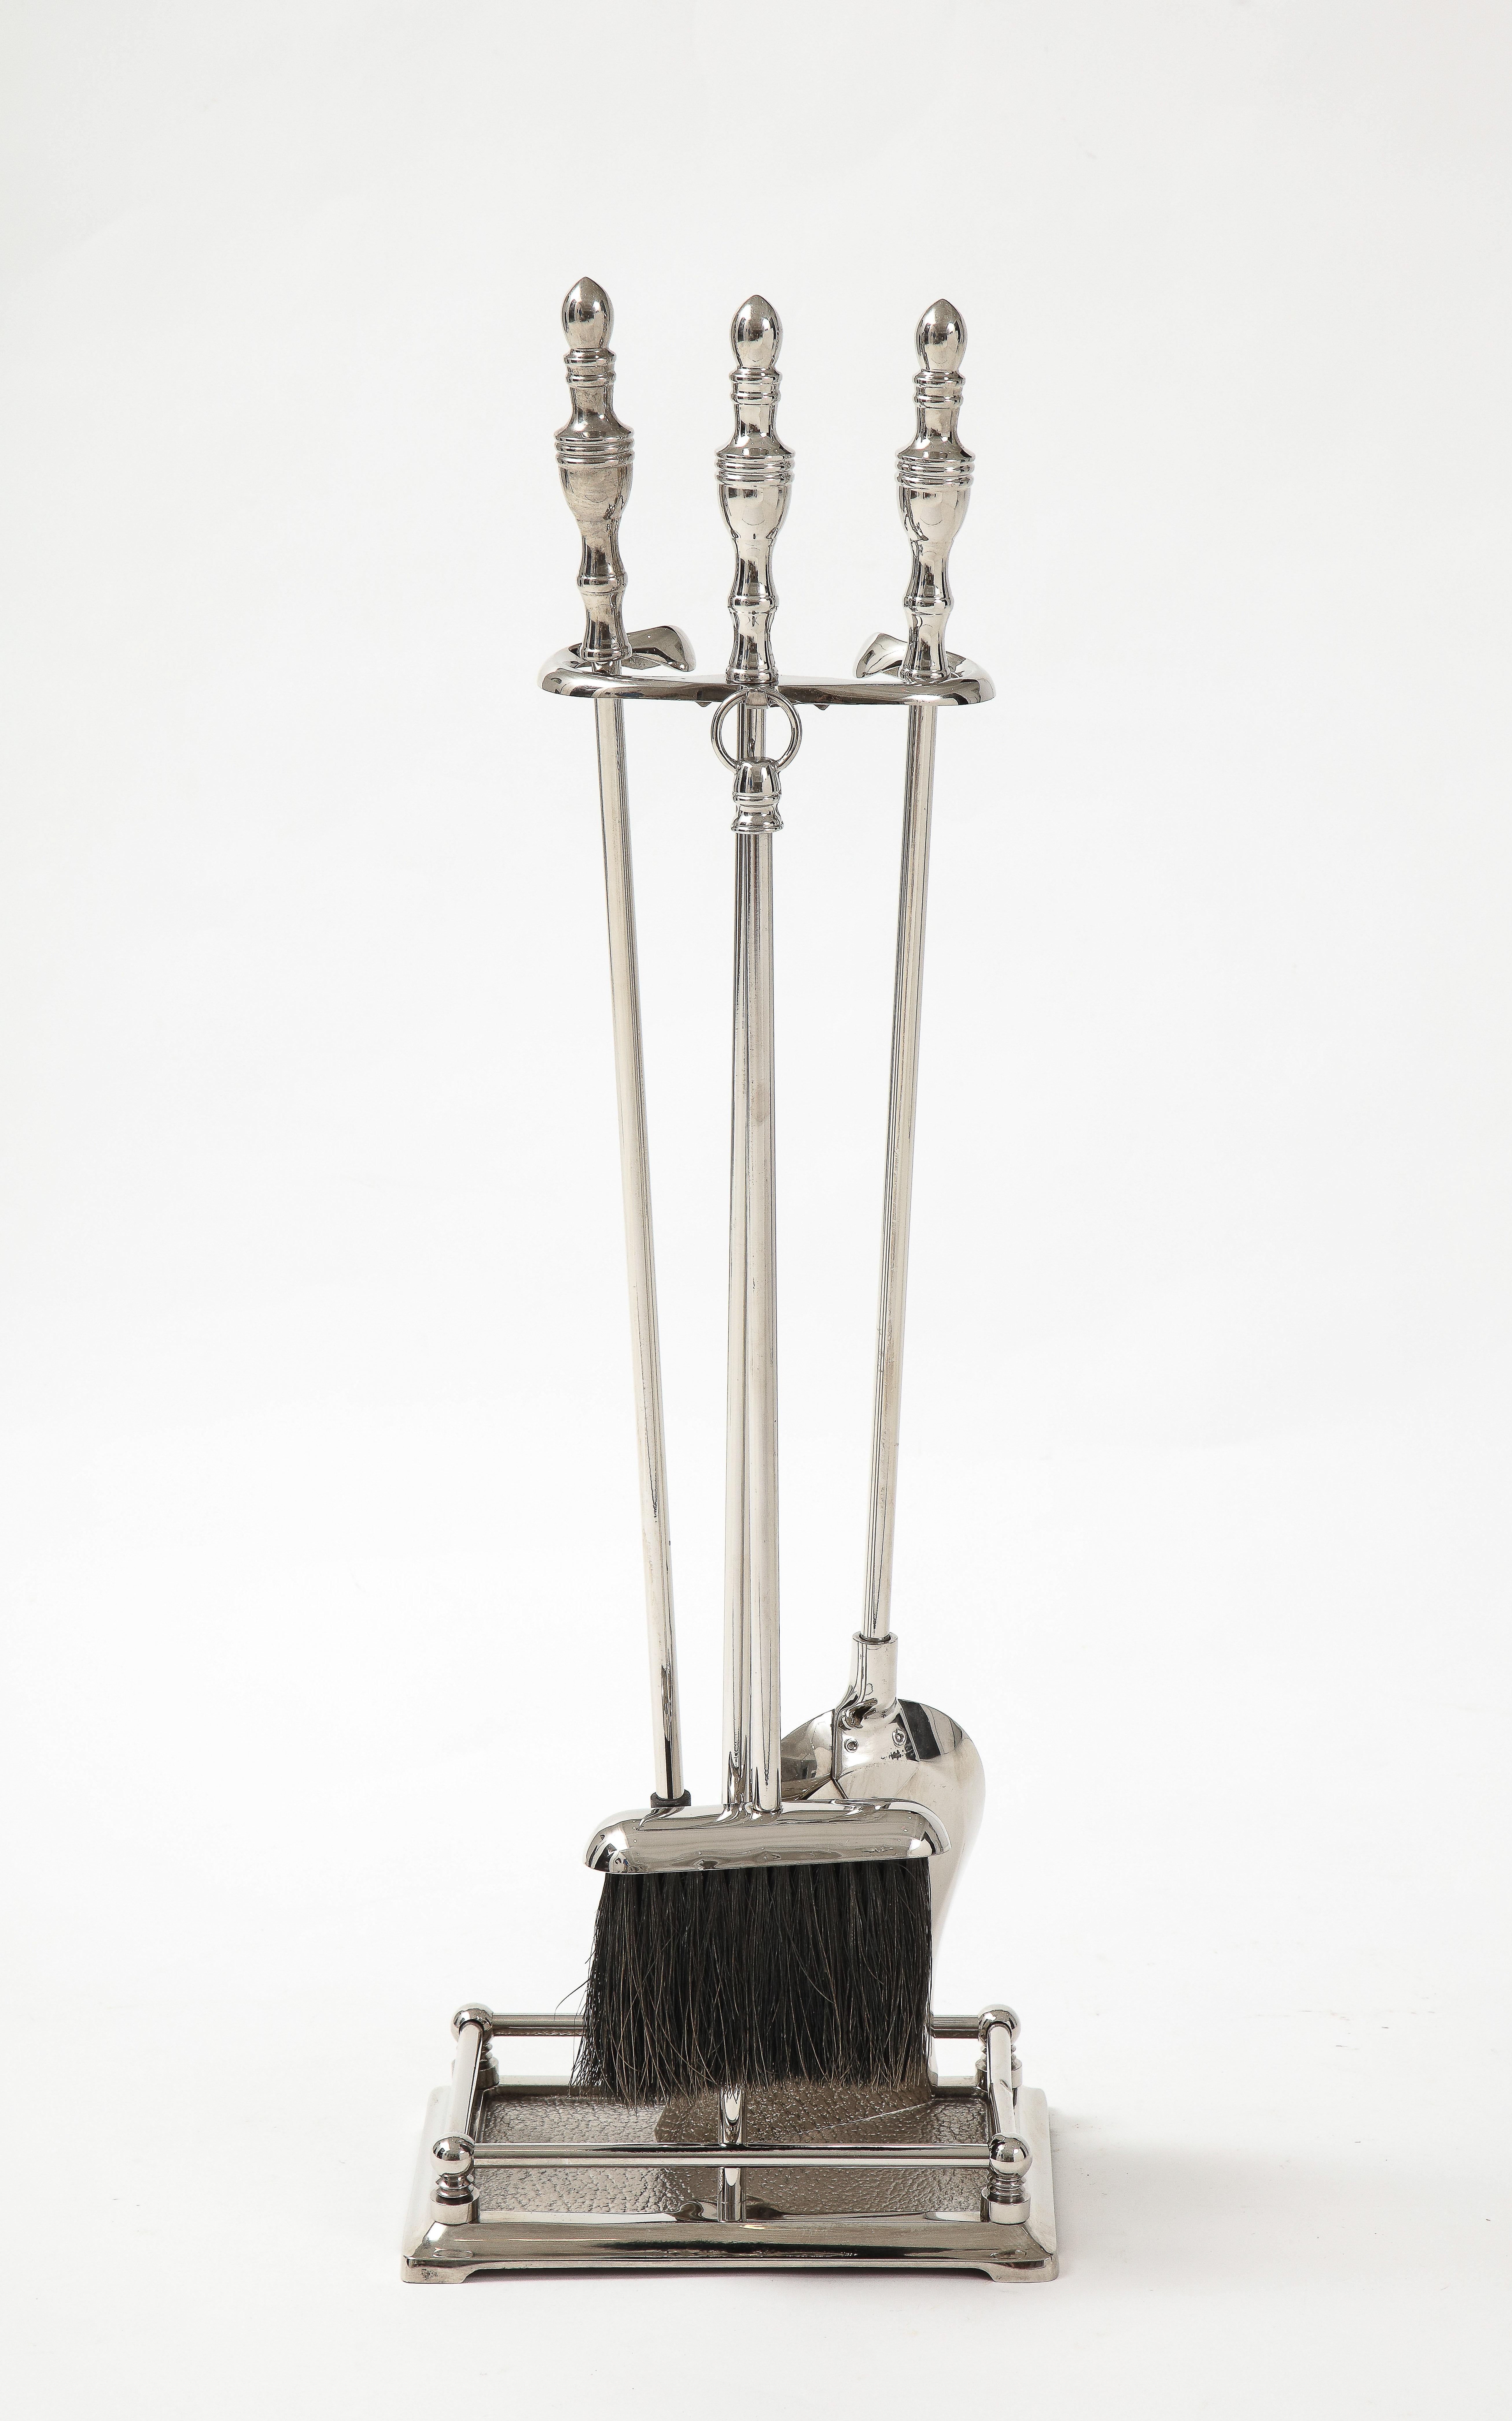 Set of Hollywood Regency polished nickel firetools with stylized spire handles. Set includes stand, poker, broom, and shovel.